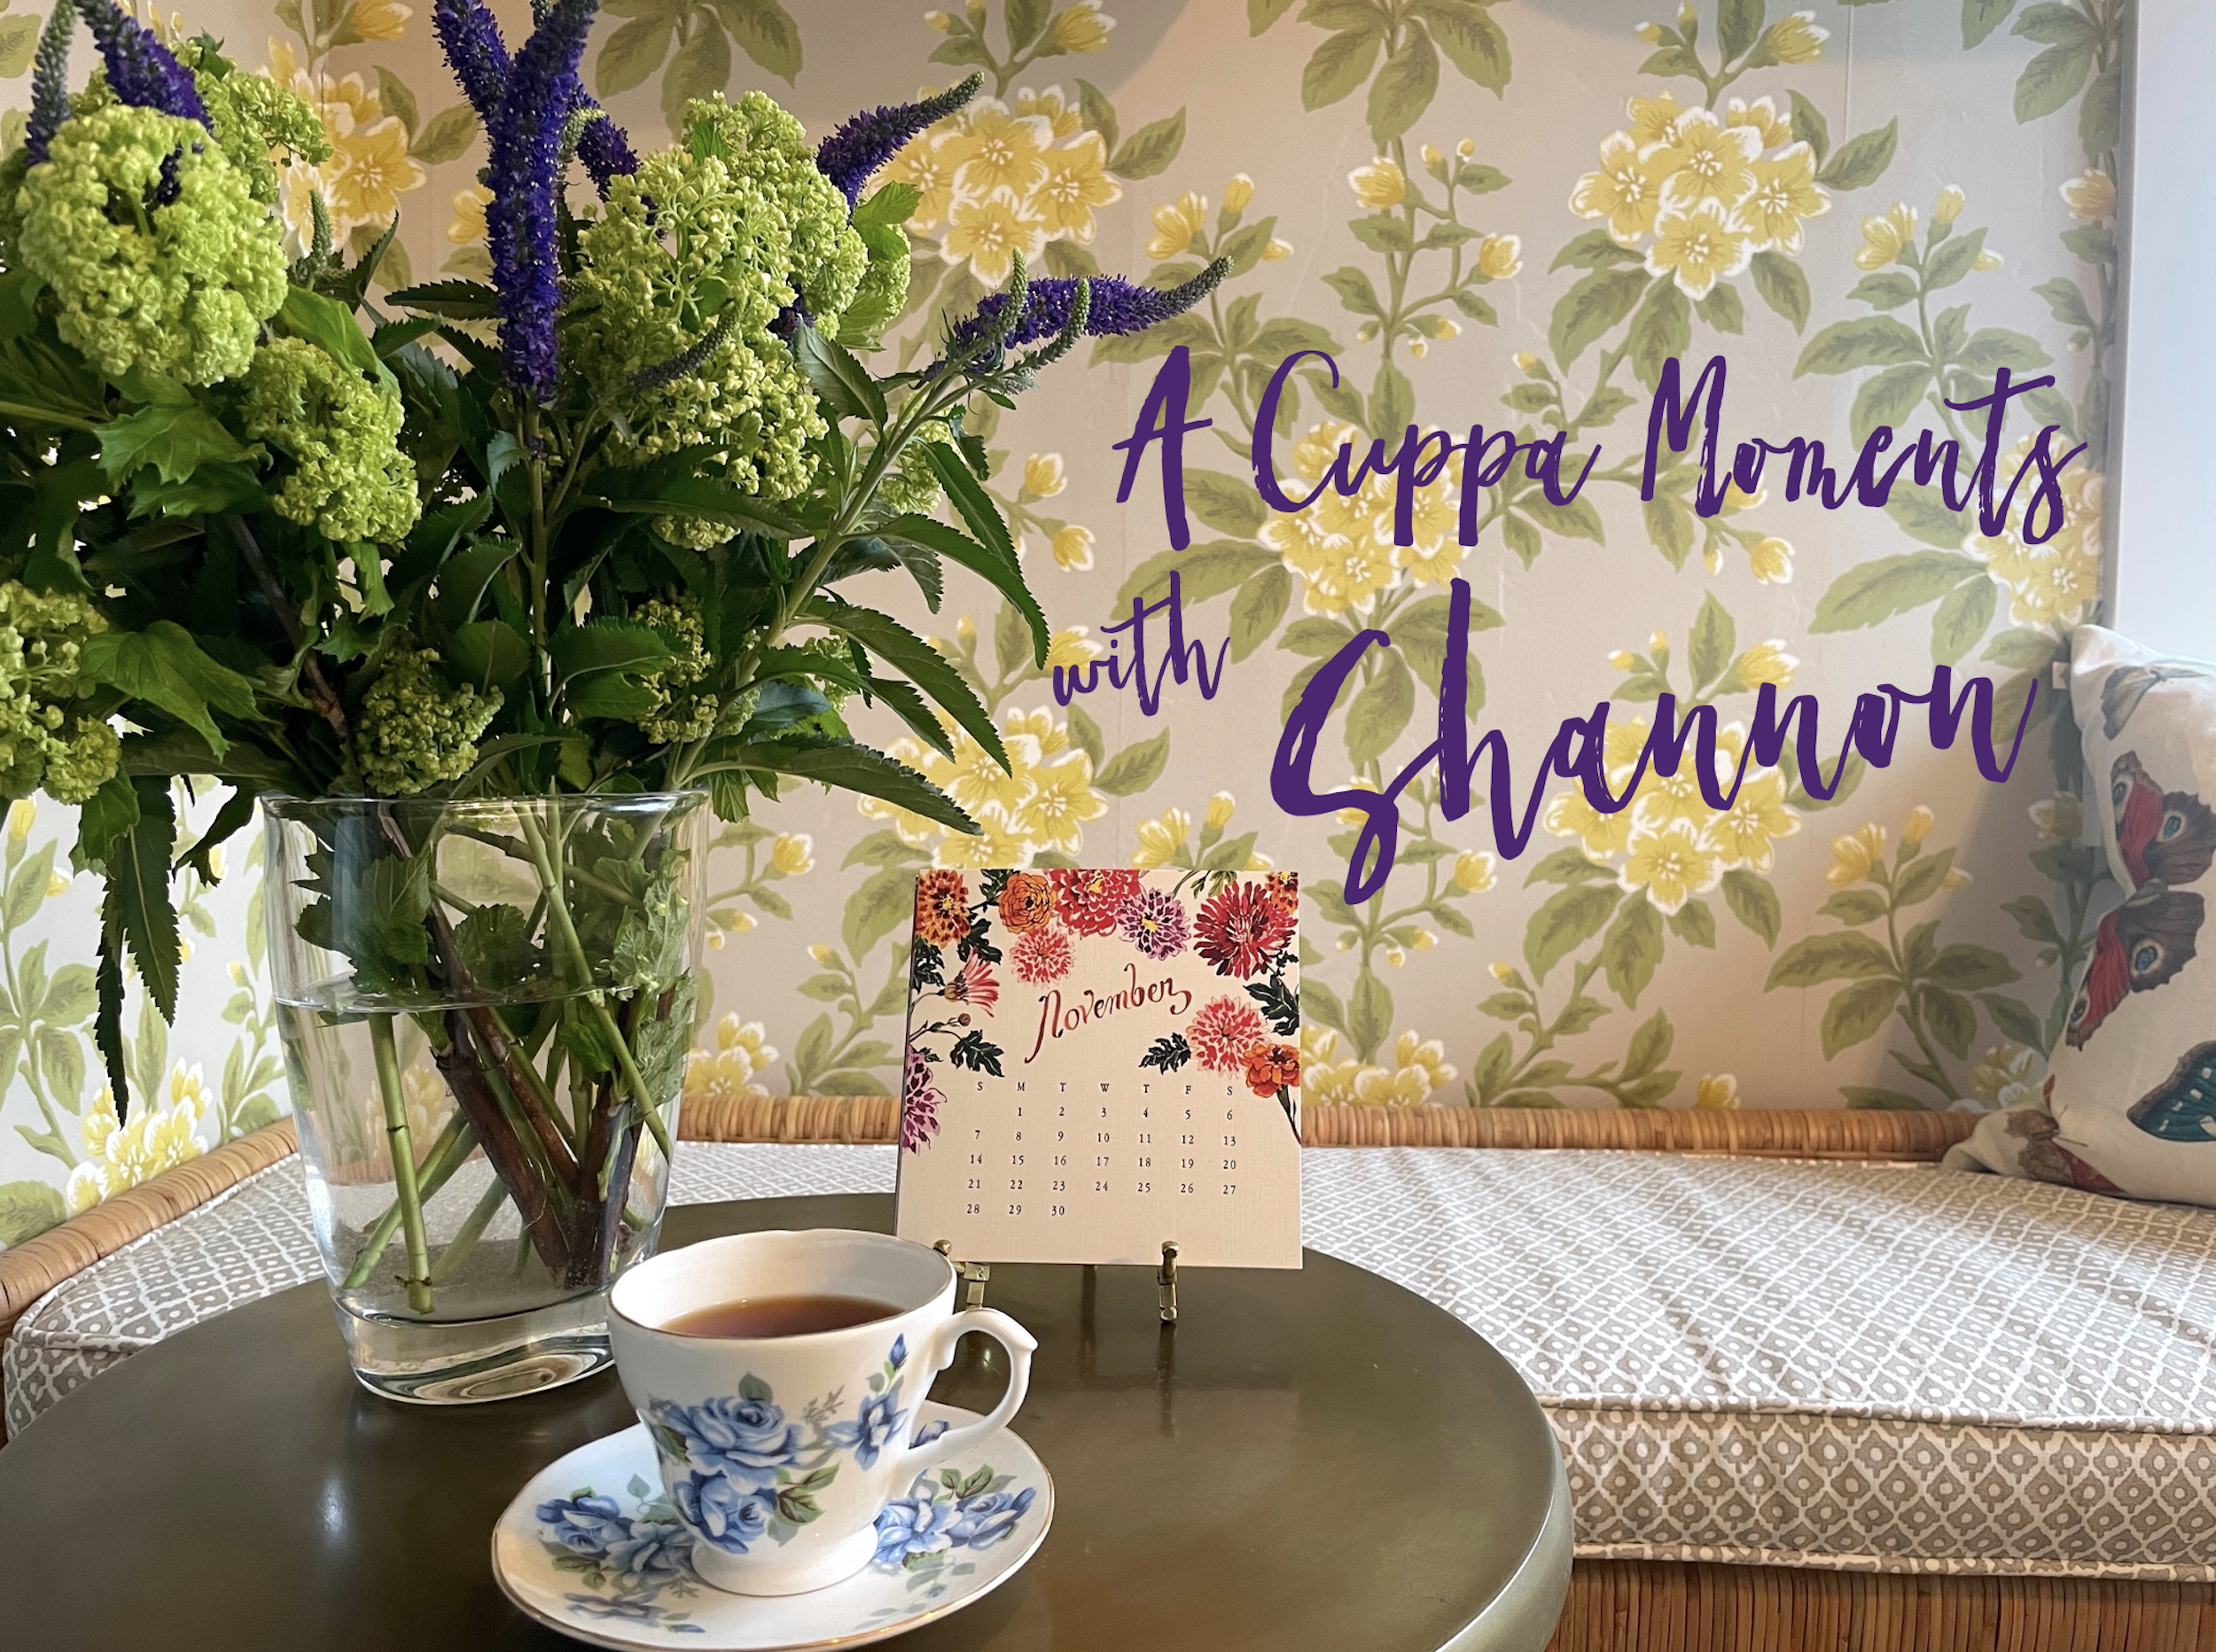 A Cuppa Moments w/Shannon – November 2021